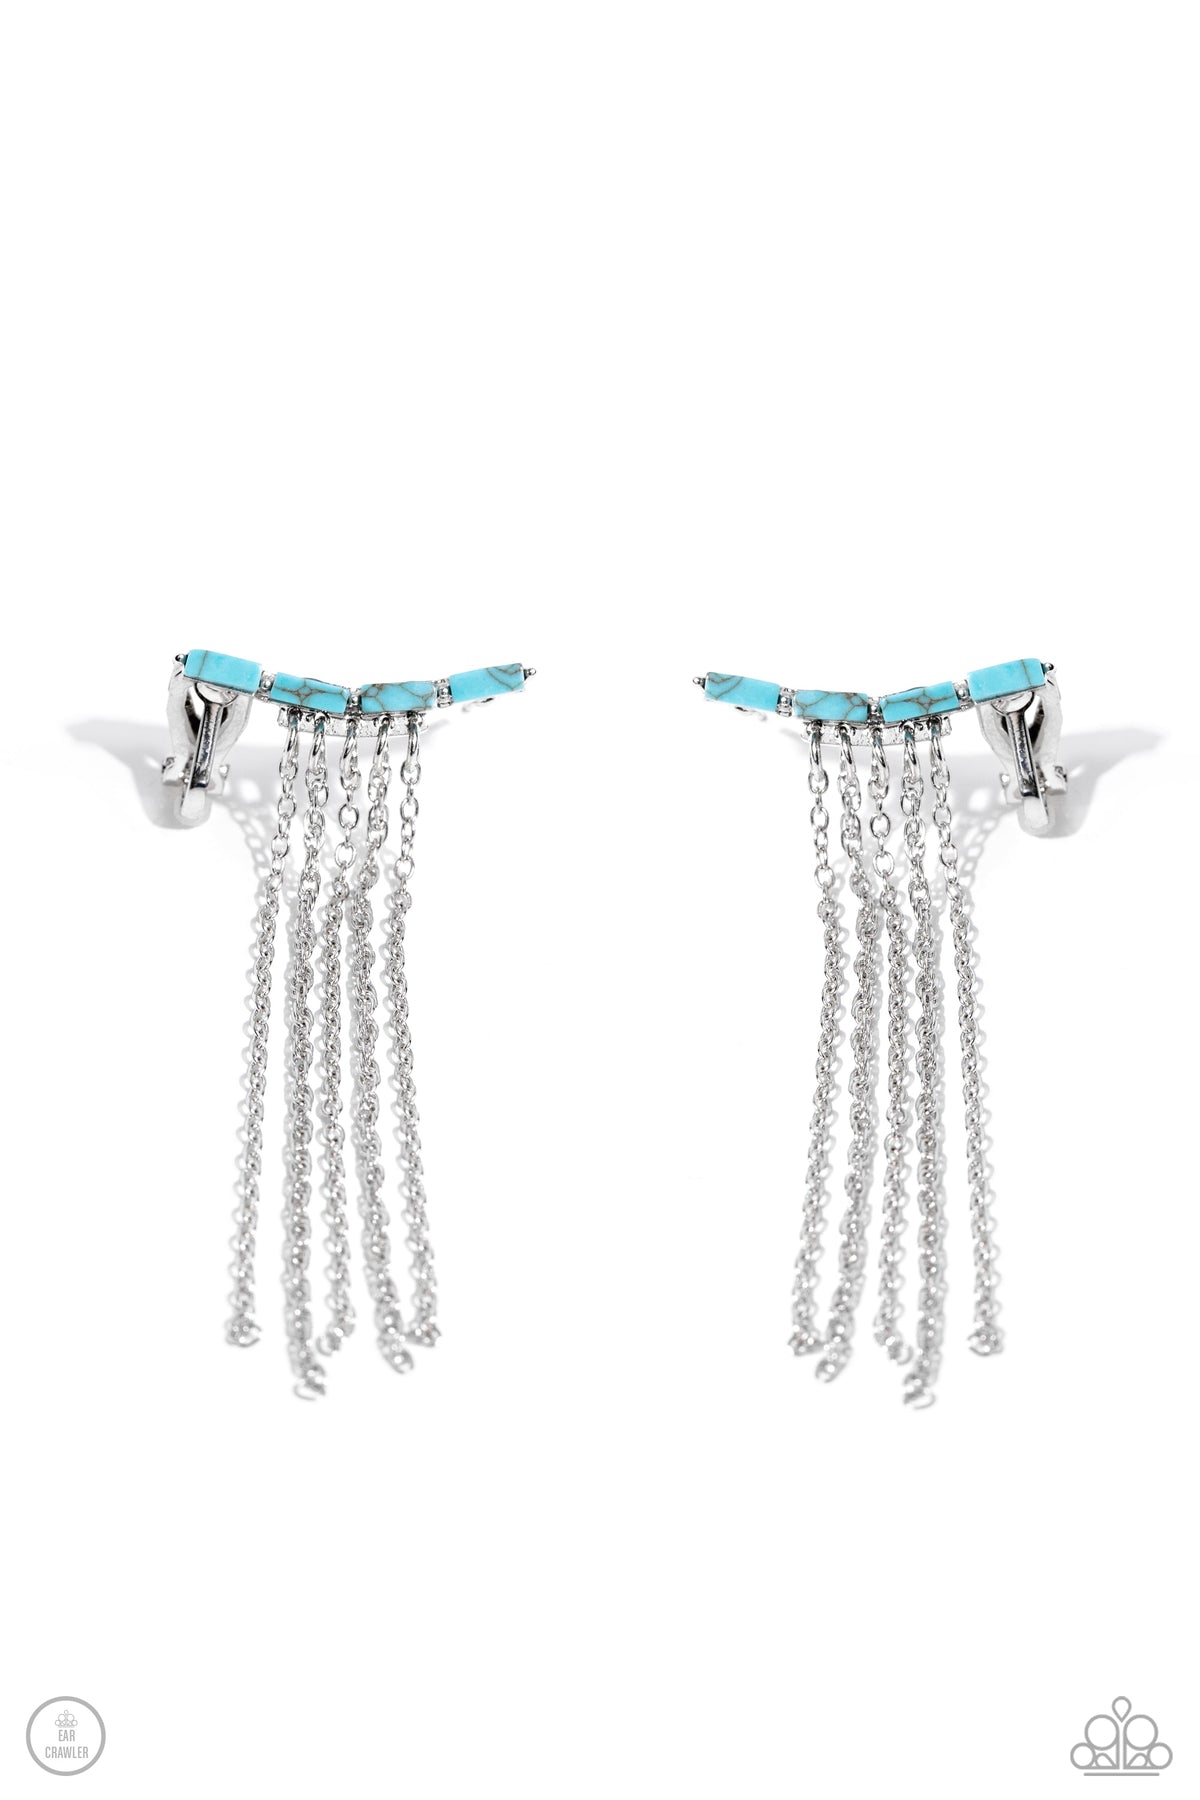 Fault Line Fringe Turquoise Blue Stone &amp; Silver Fringe Ear Crawler Earrings - Paparazzi Accessories- lightbox - CarasShop.com - $5 Jewelry by Cara Jewels